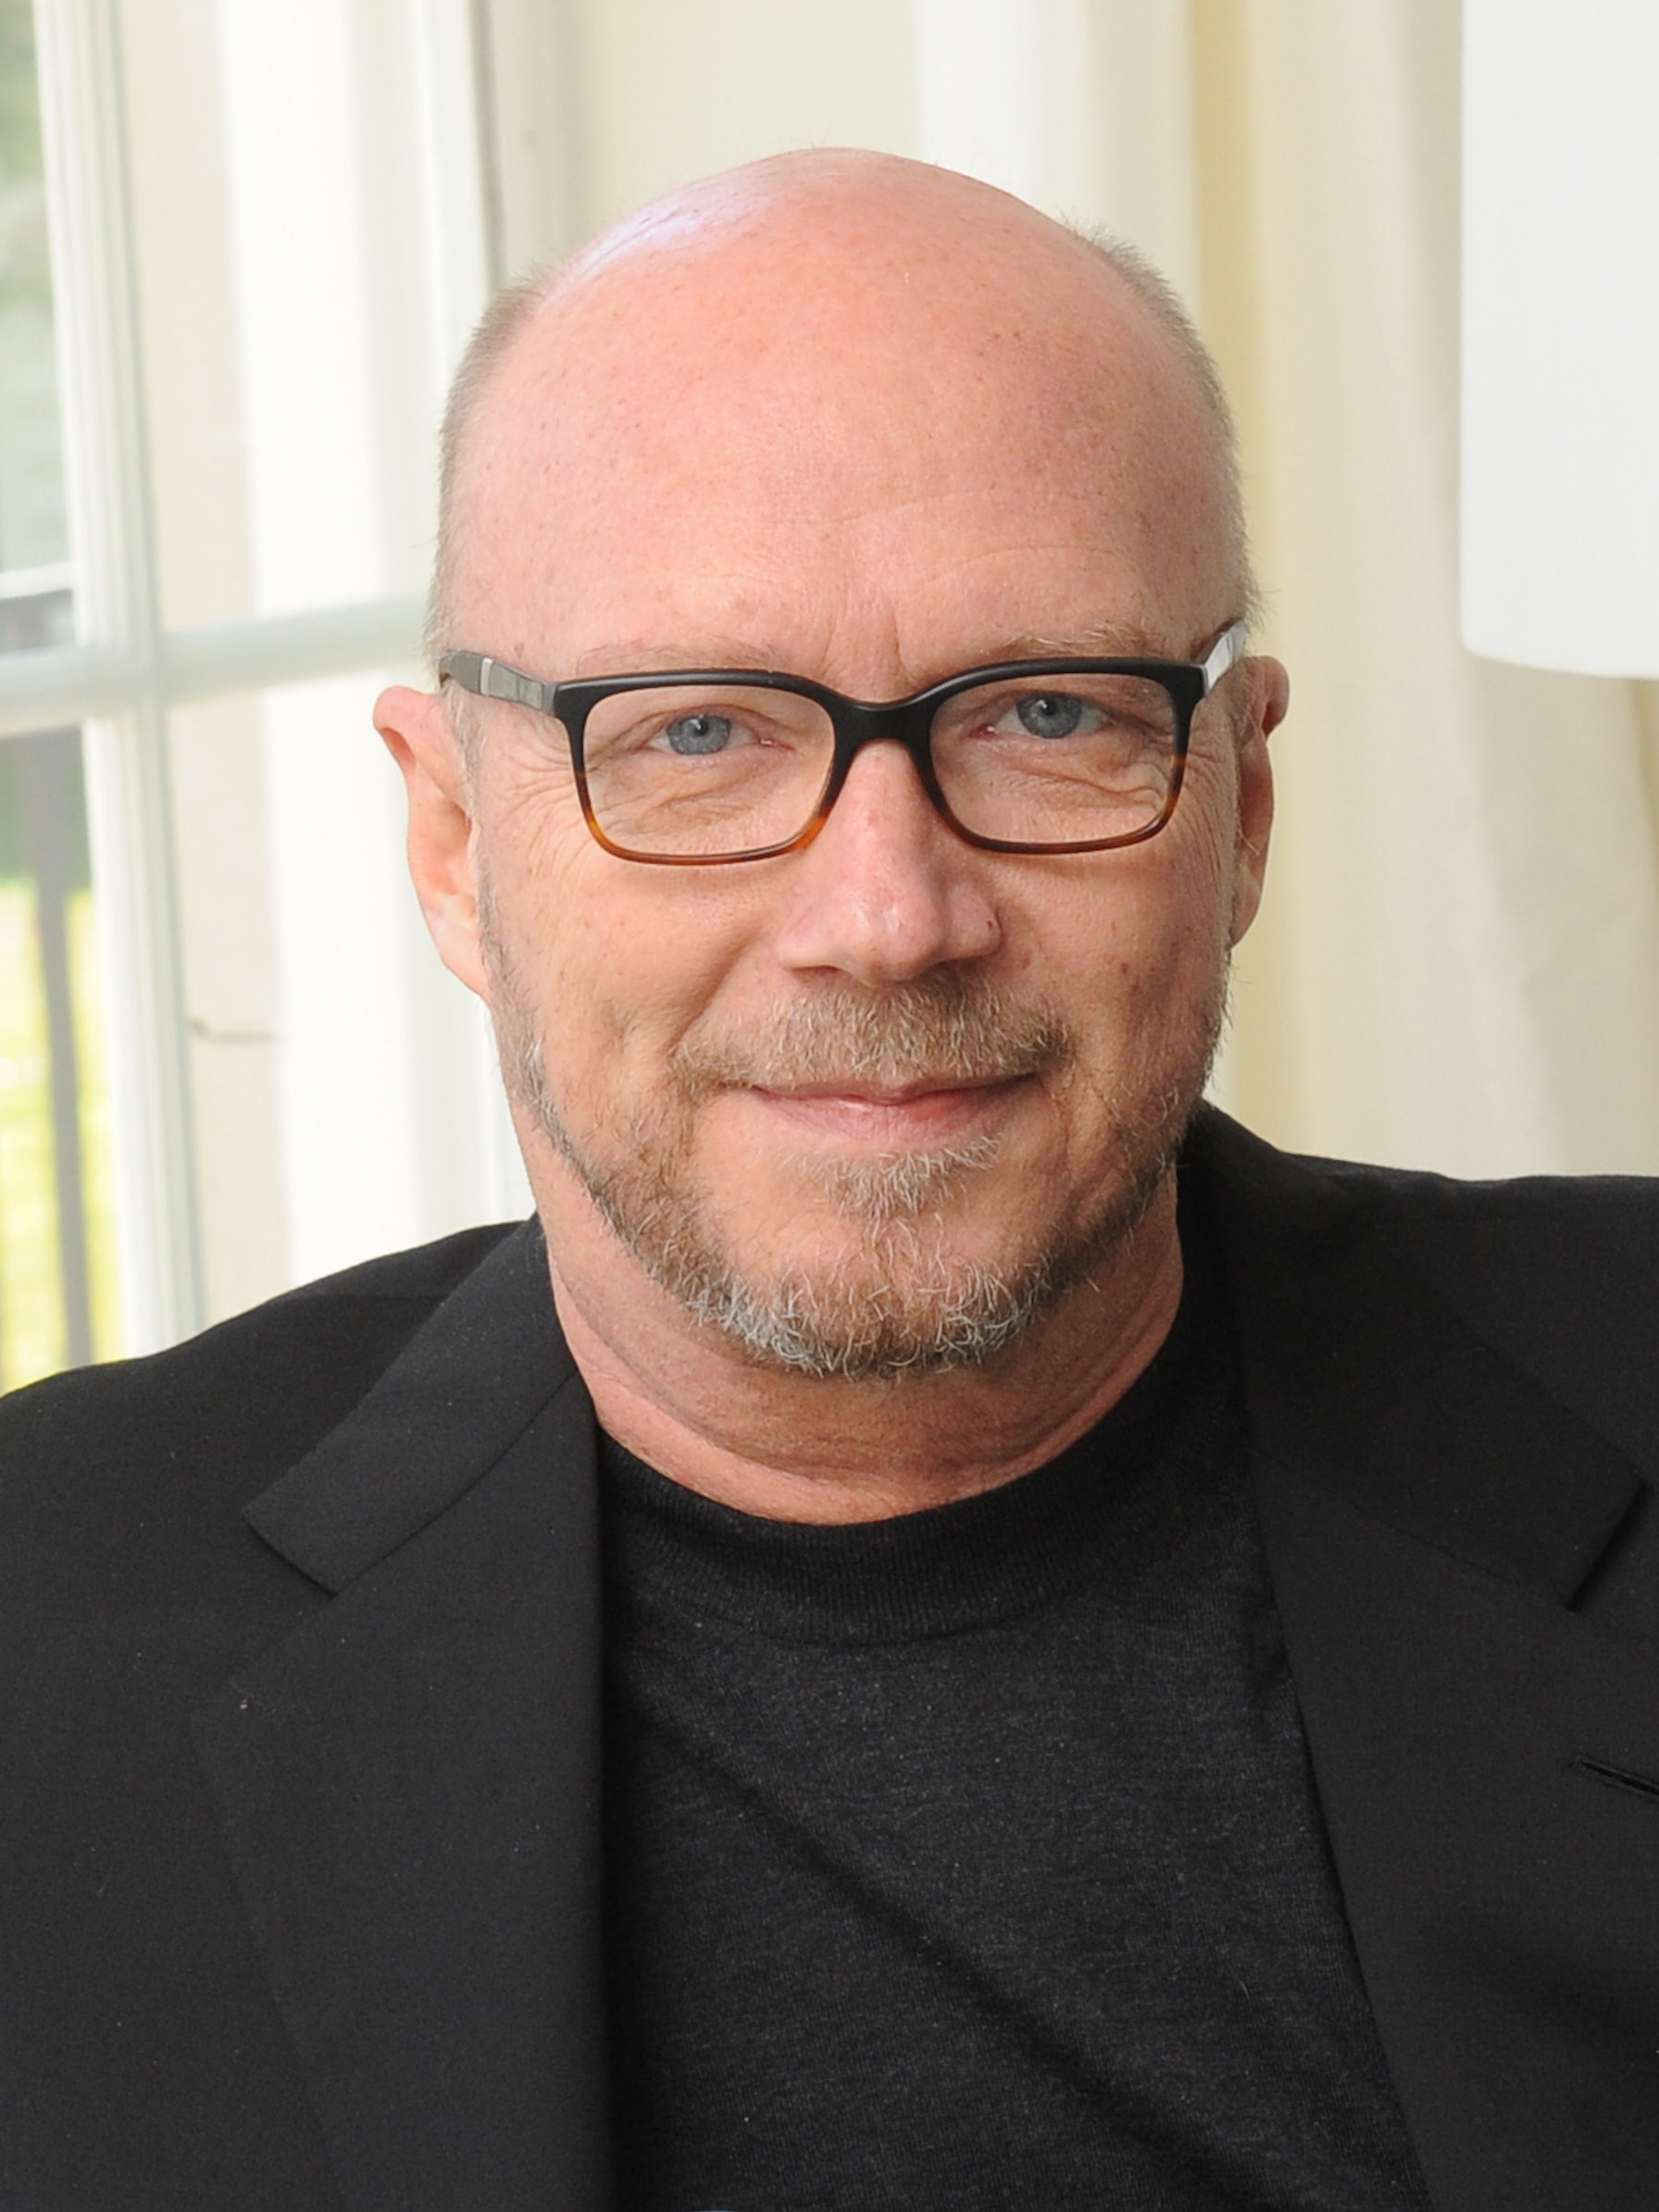 Entertainment News Roundup: Oscar-winning director Paul Haggis arrested in Italy on sexual assault charges; Box Office: Pixar's 'Lightyear' Underwhelms With $51 Million Debut as 'Jurassic World' Stays No. 1